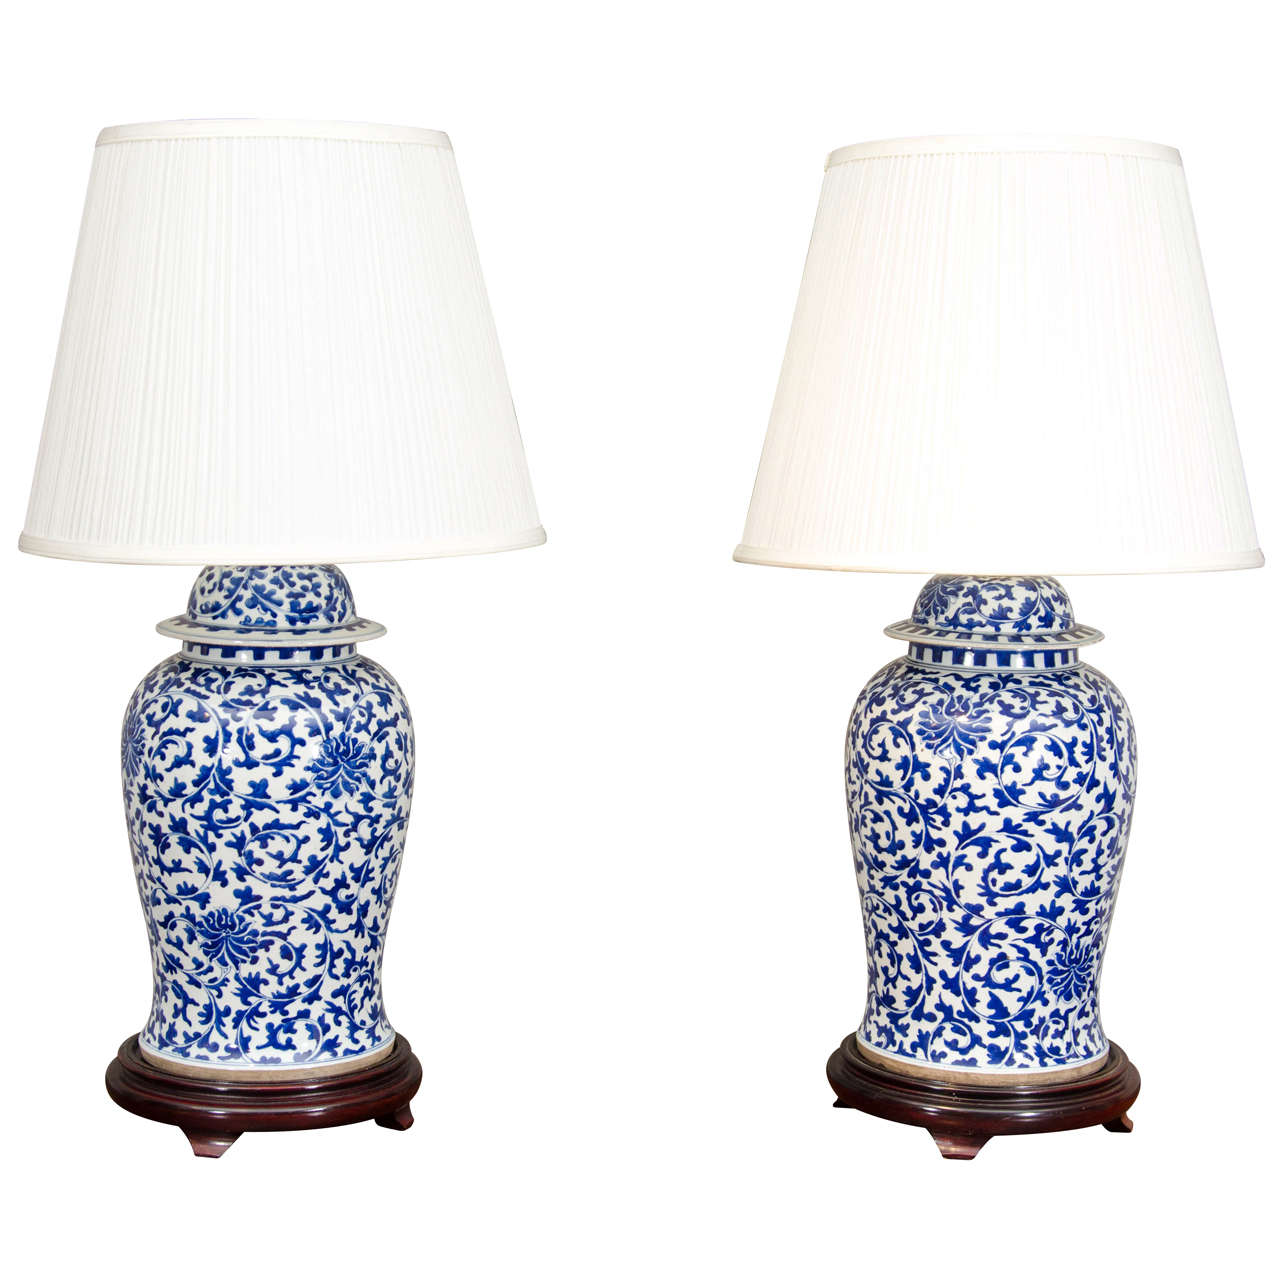 Pair of Chinese Blue and White Porcelain Temple Jar Lamps